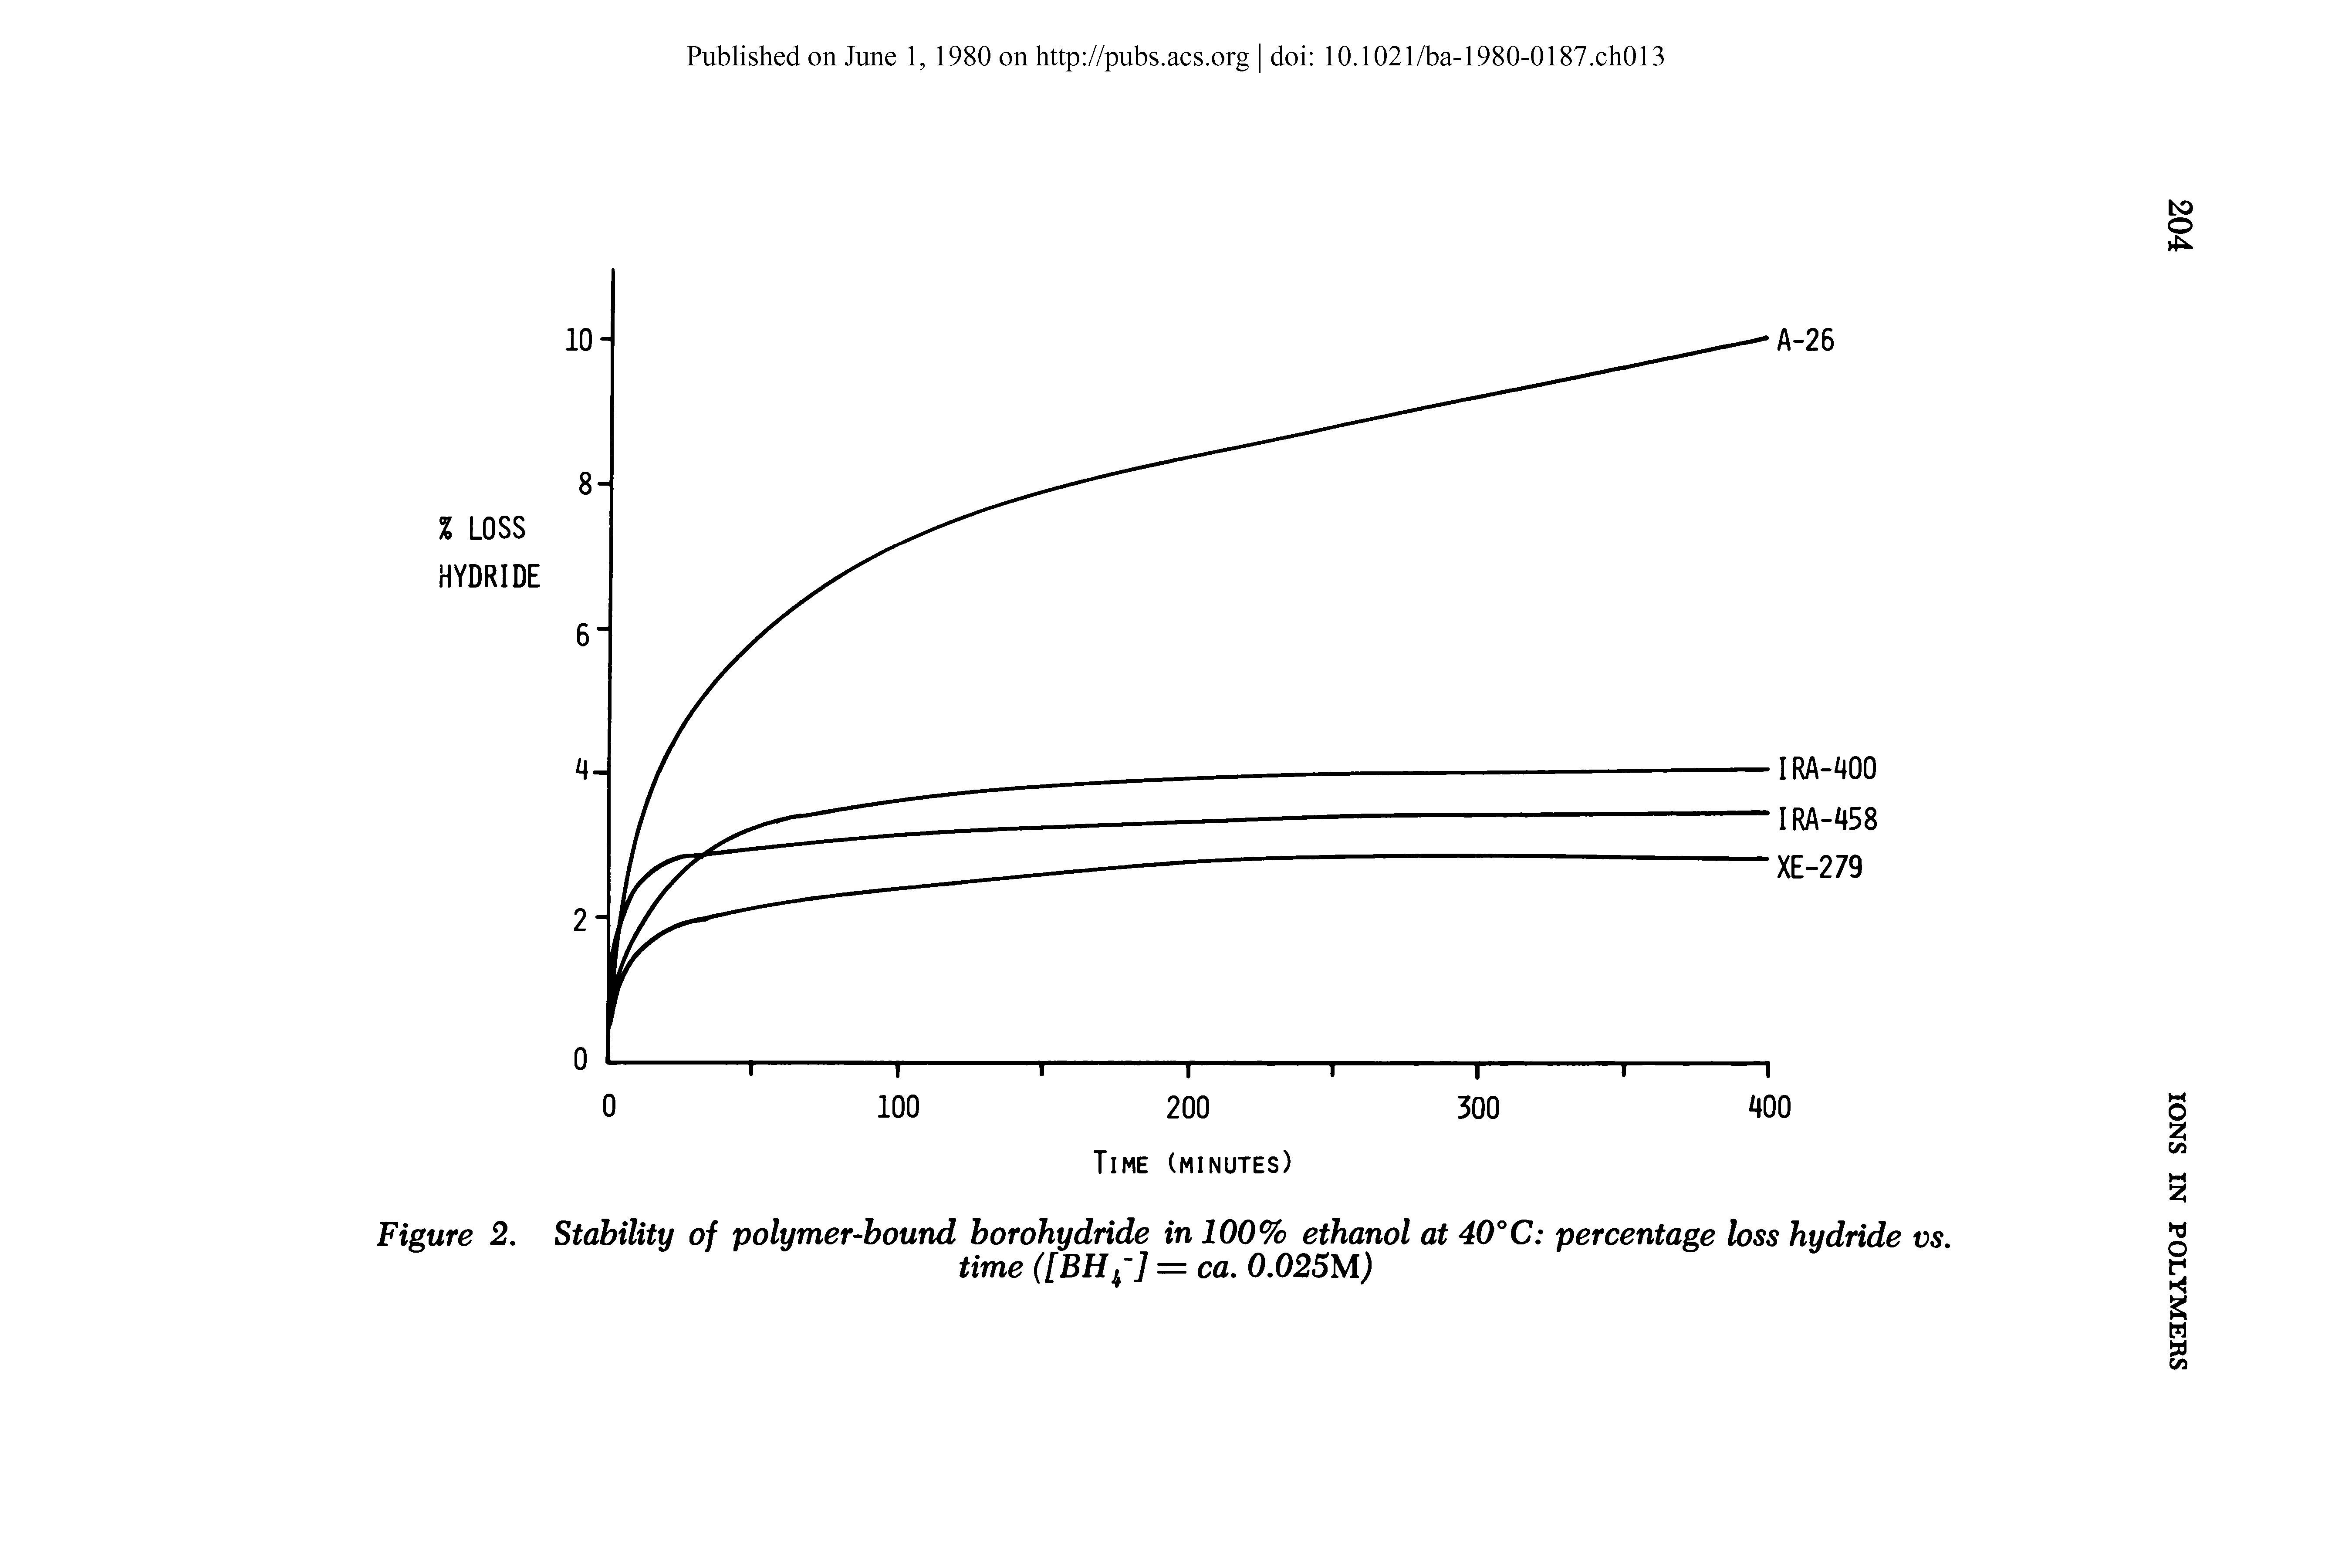 Figure 2. Stability of polymer-bound borohydride in 100% ethanol at 40°C percentage loss hydride vs.